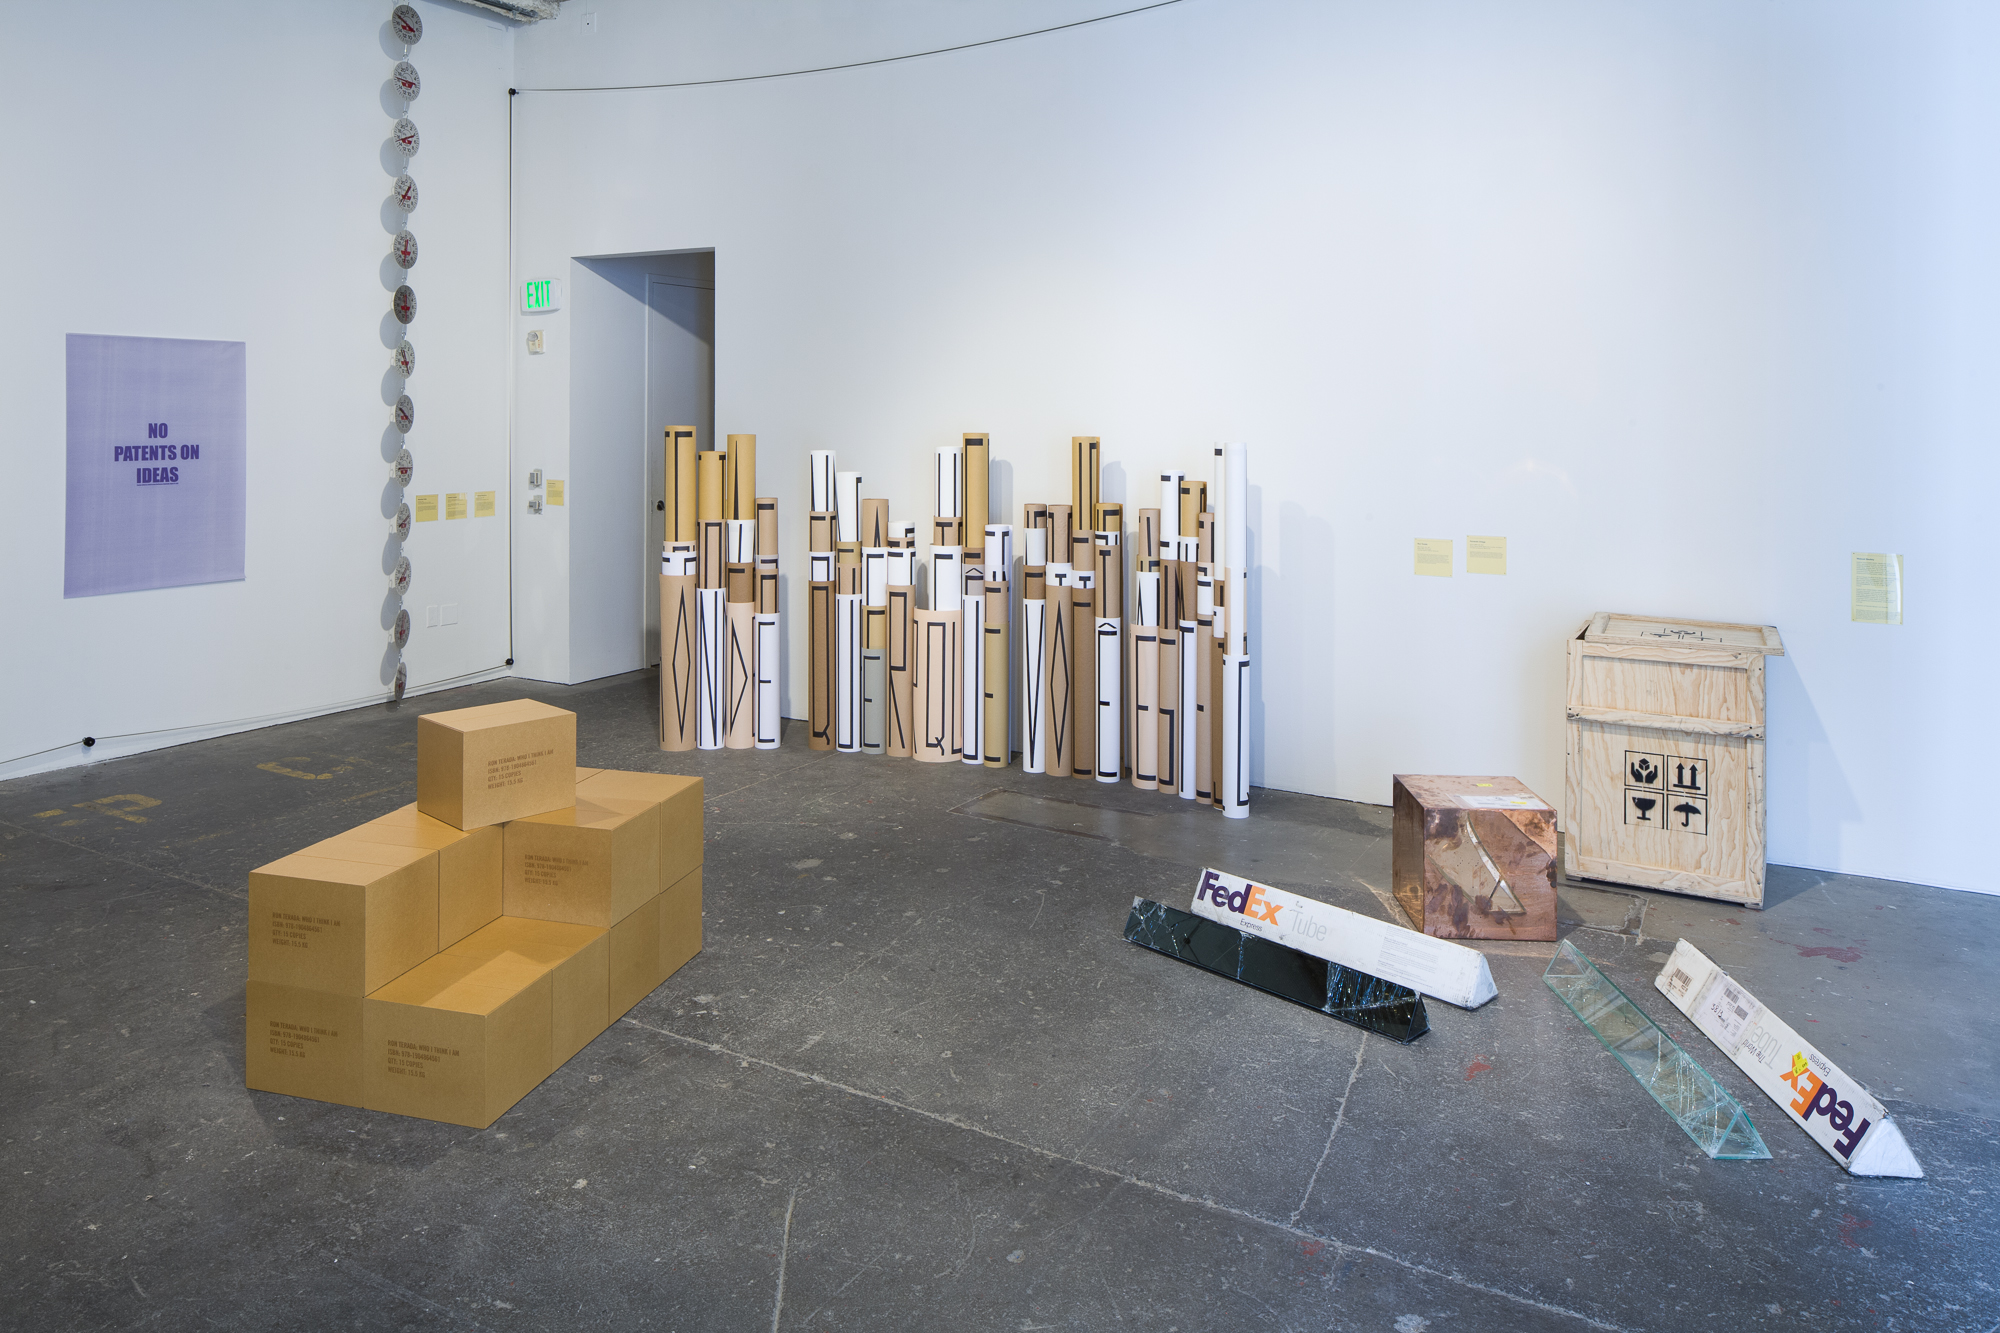 When Attitudes Became Form Become Attitudes, 2012. Installation view, CCA Wattis Institute for Contemporary Arts, curated by Jens Hoffmann. Photograph by Johnna Arnold.